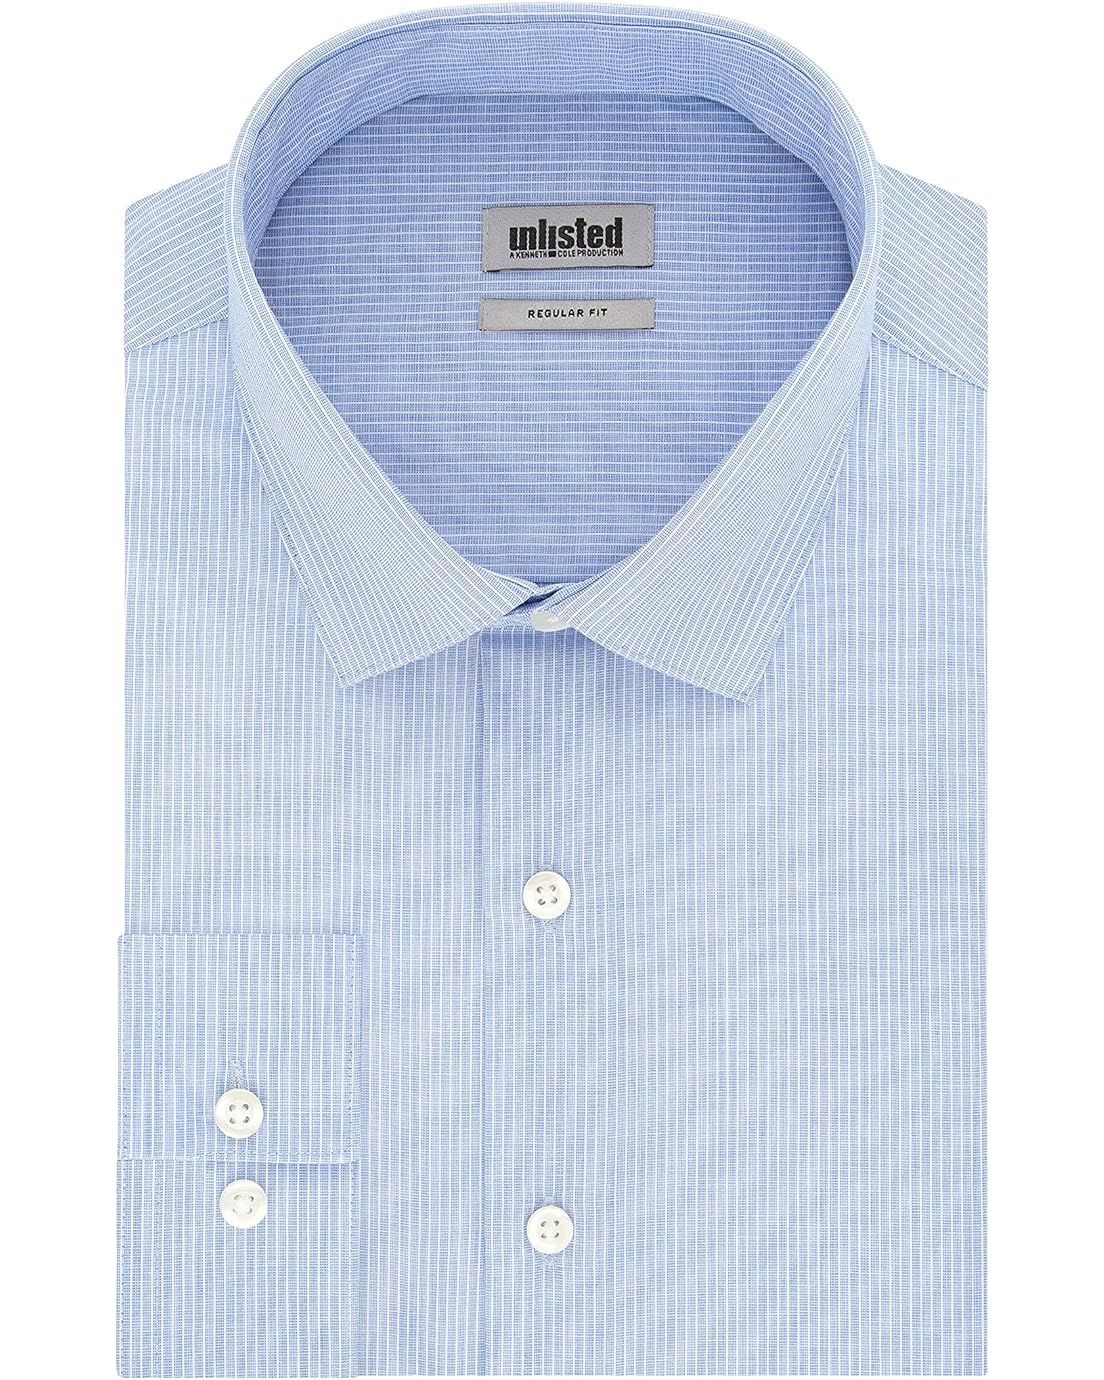 Unlisted by Kenneth Cole Mens Dress Shirt Regular Fit Checks and Stripes (Patterned)